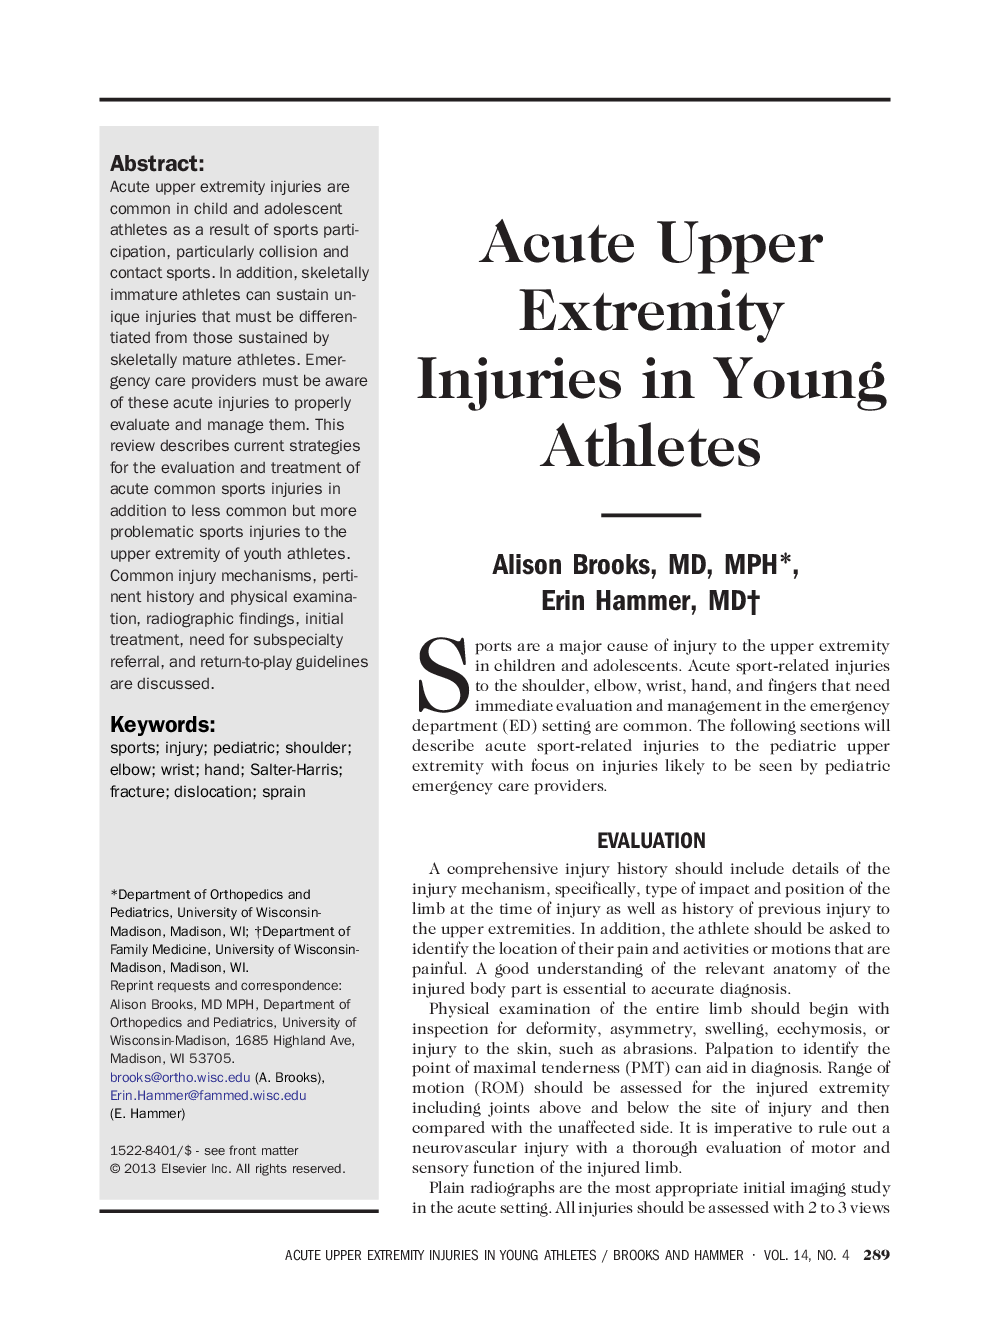 Acute Upper Extremity Injuries in Young Athletes